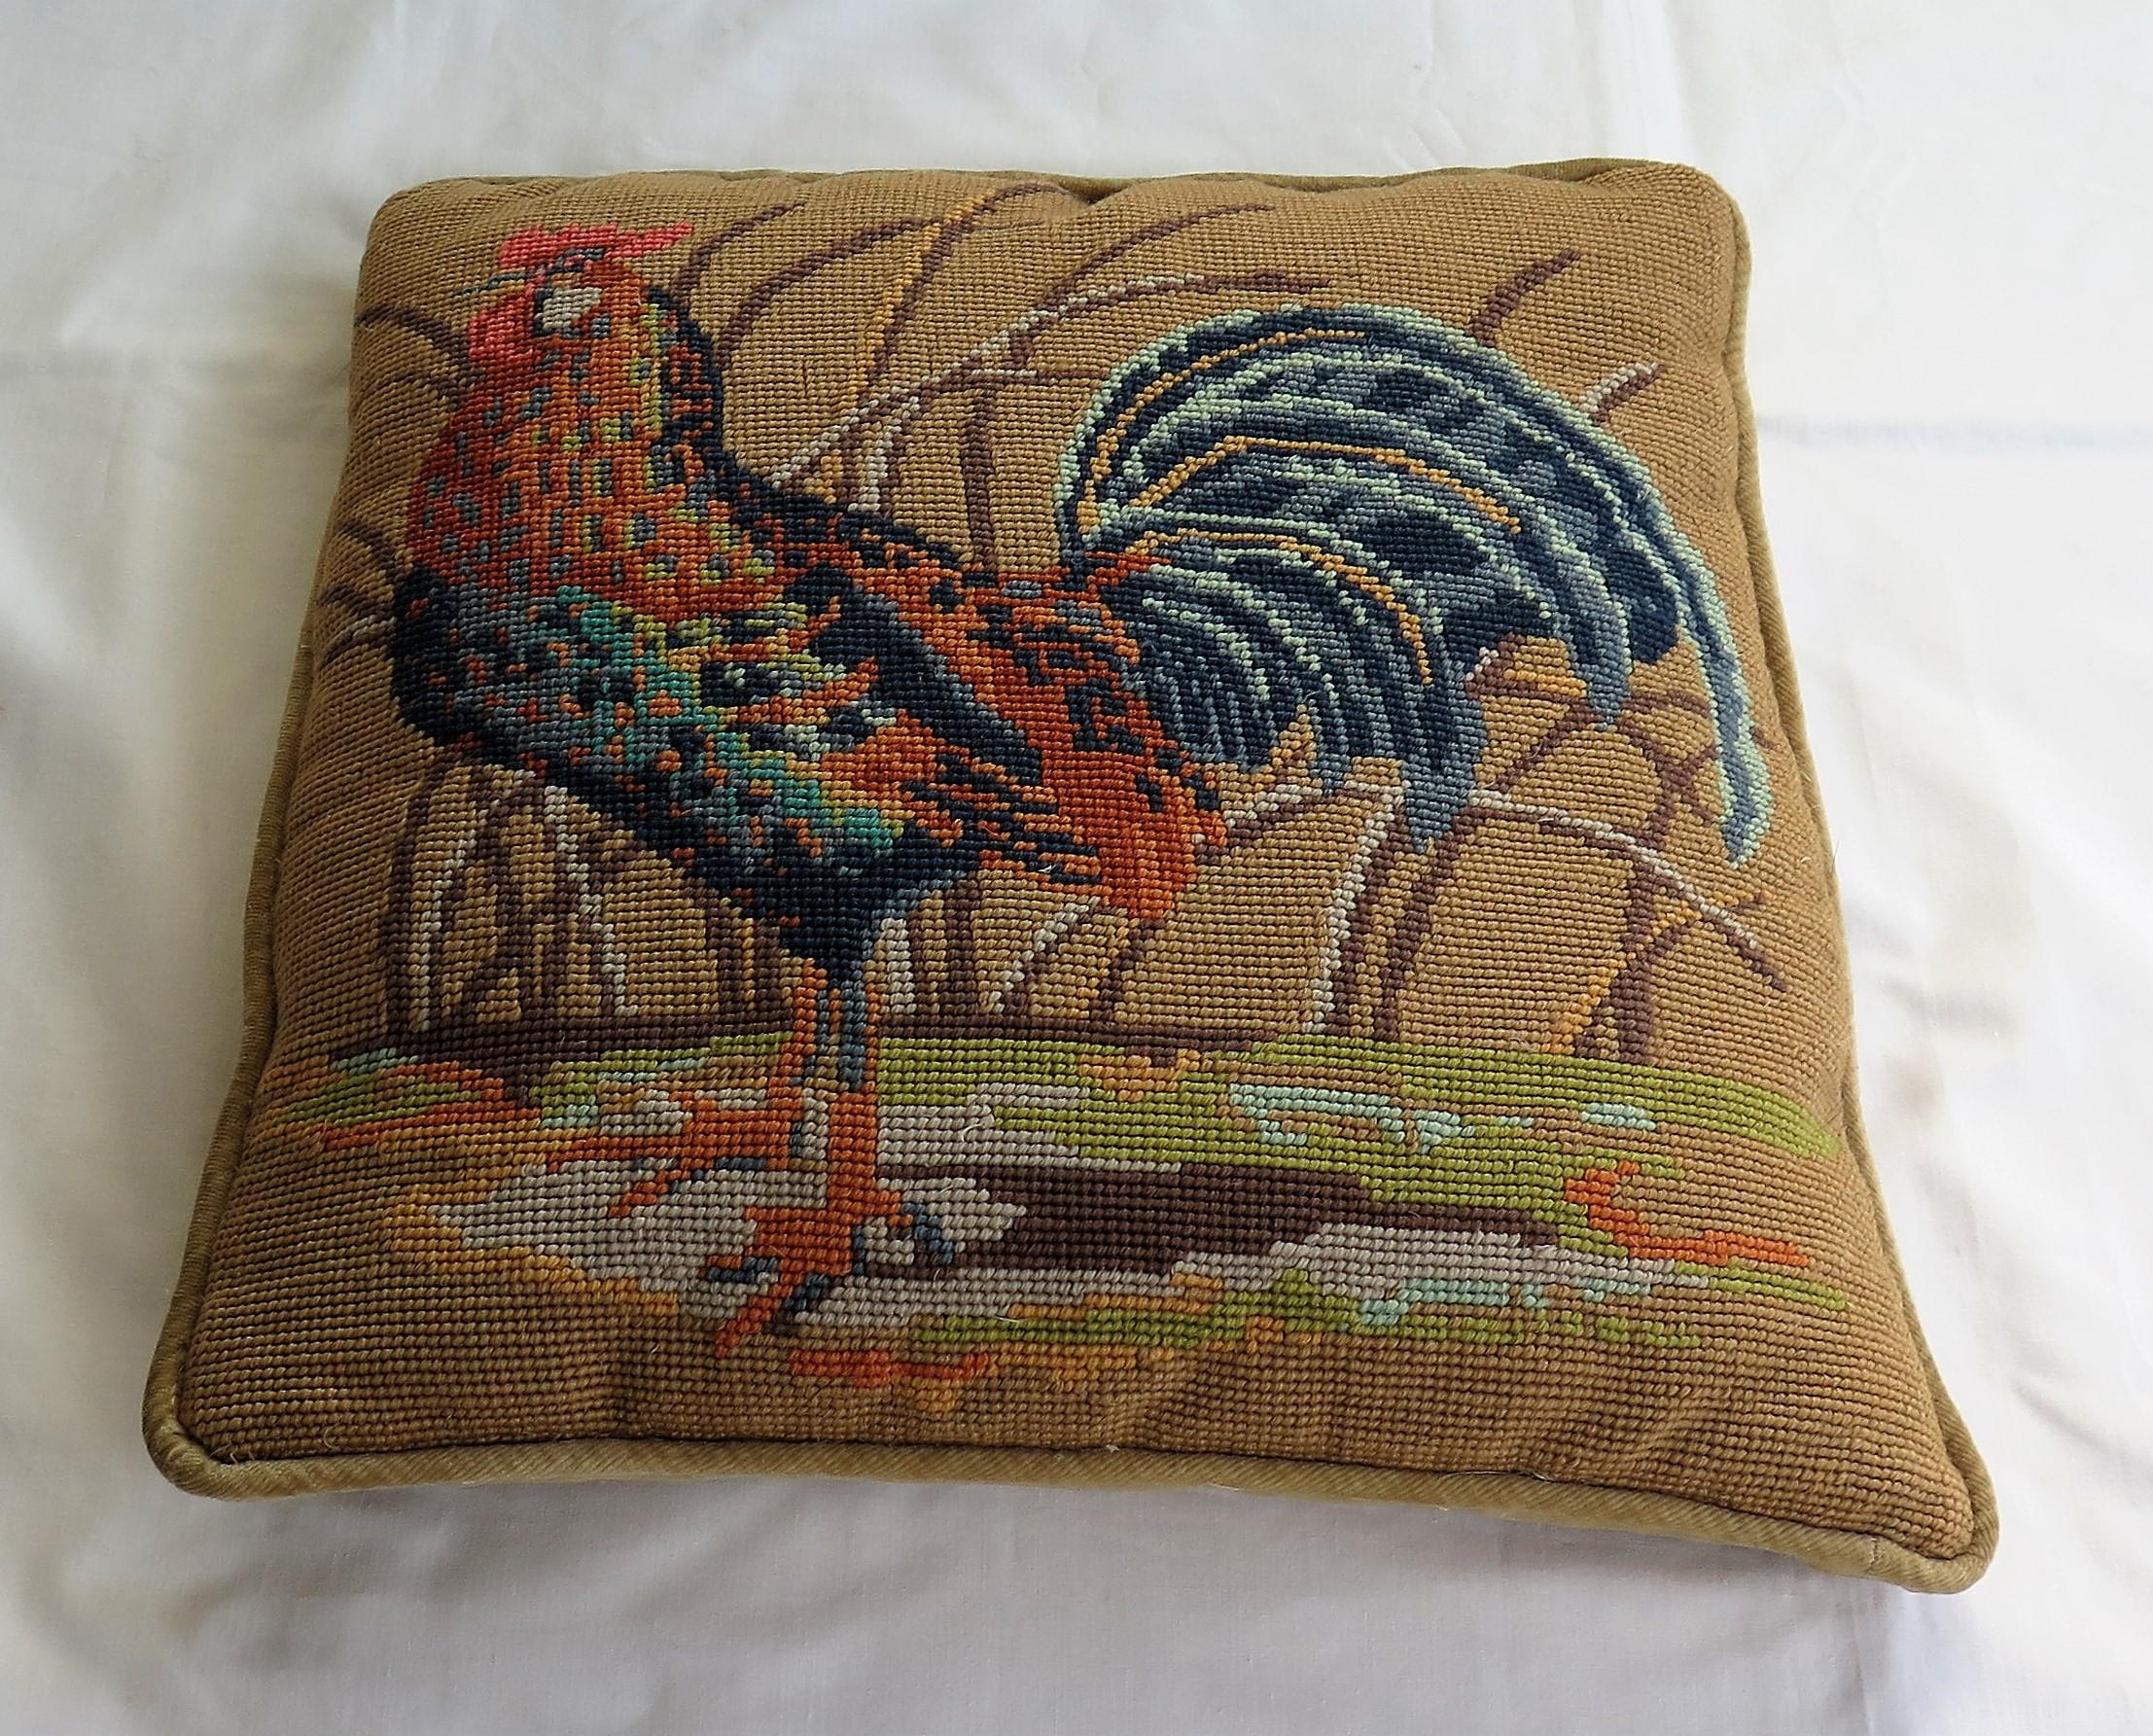 Country Needlepoint Tapestry Cushion or Pillow of Rooster or Cockerel, circa 1940